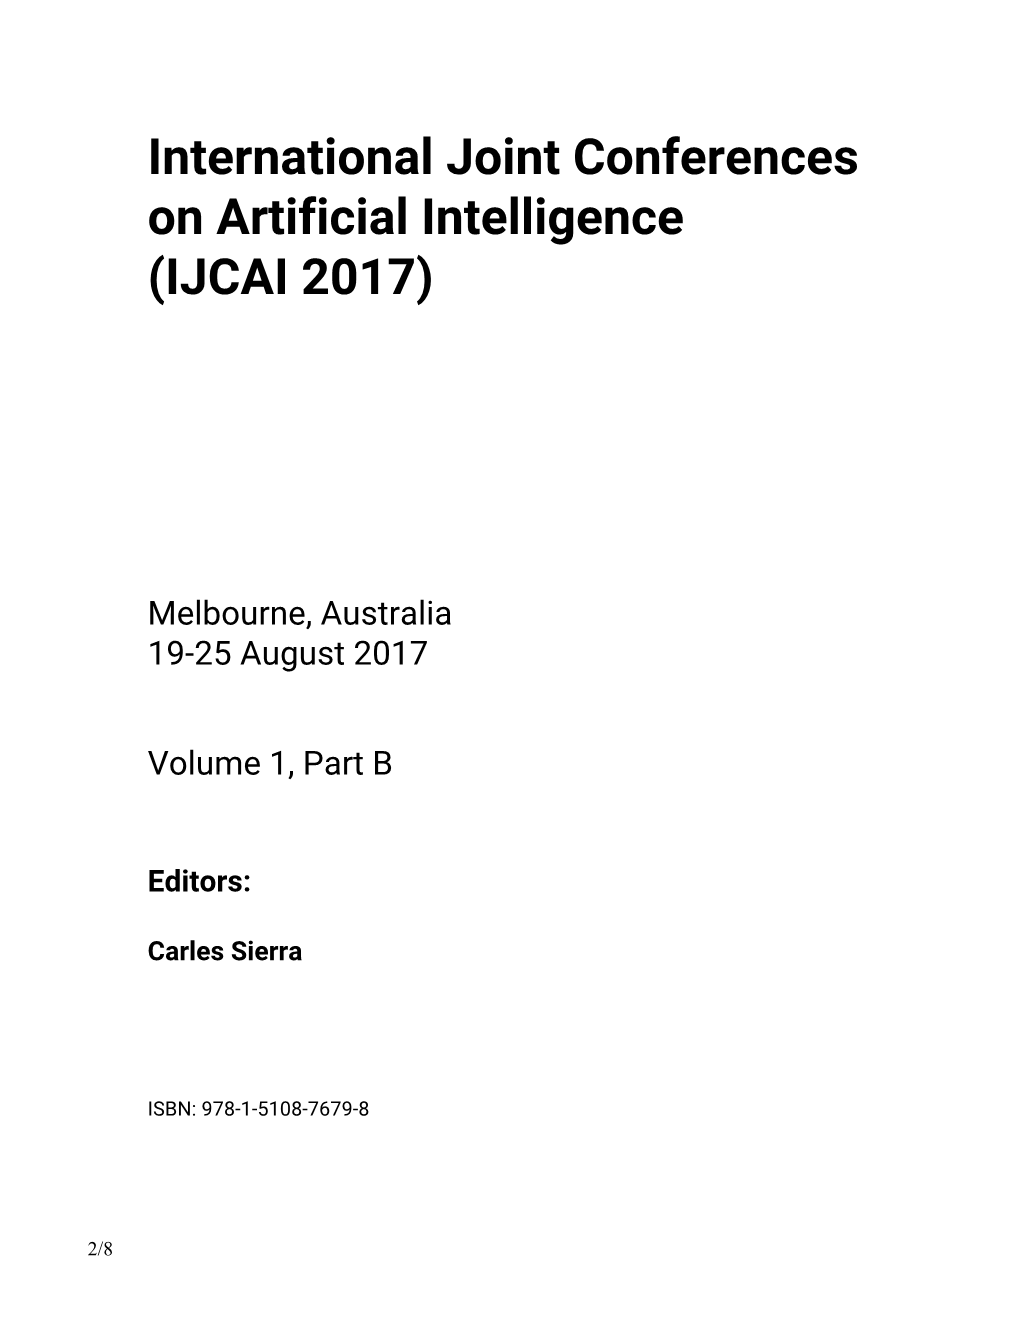 International Joint Conferences on Artificial Intelligence (IJCAI 2017)